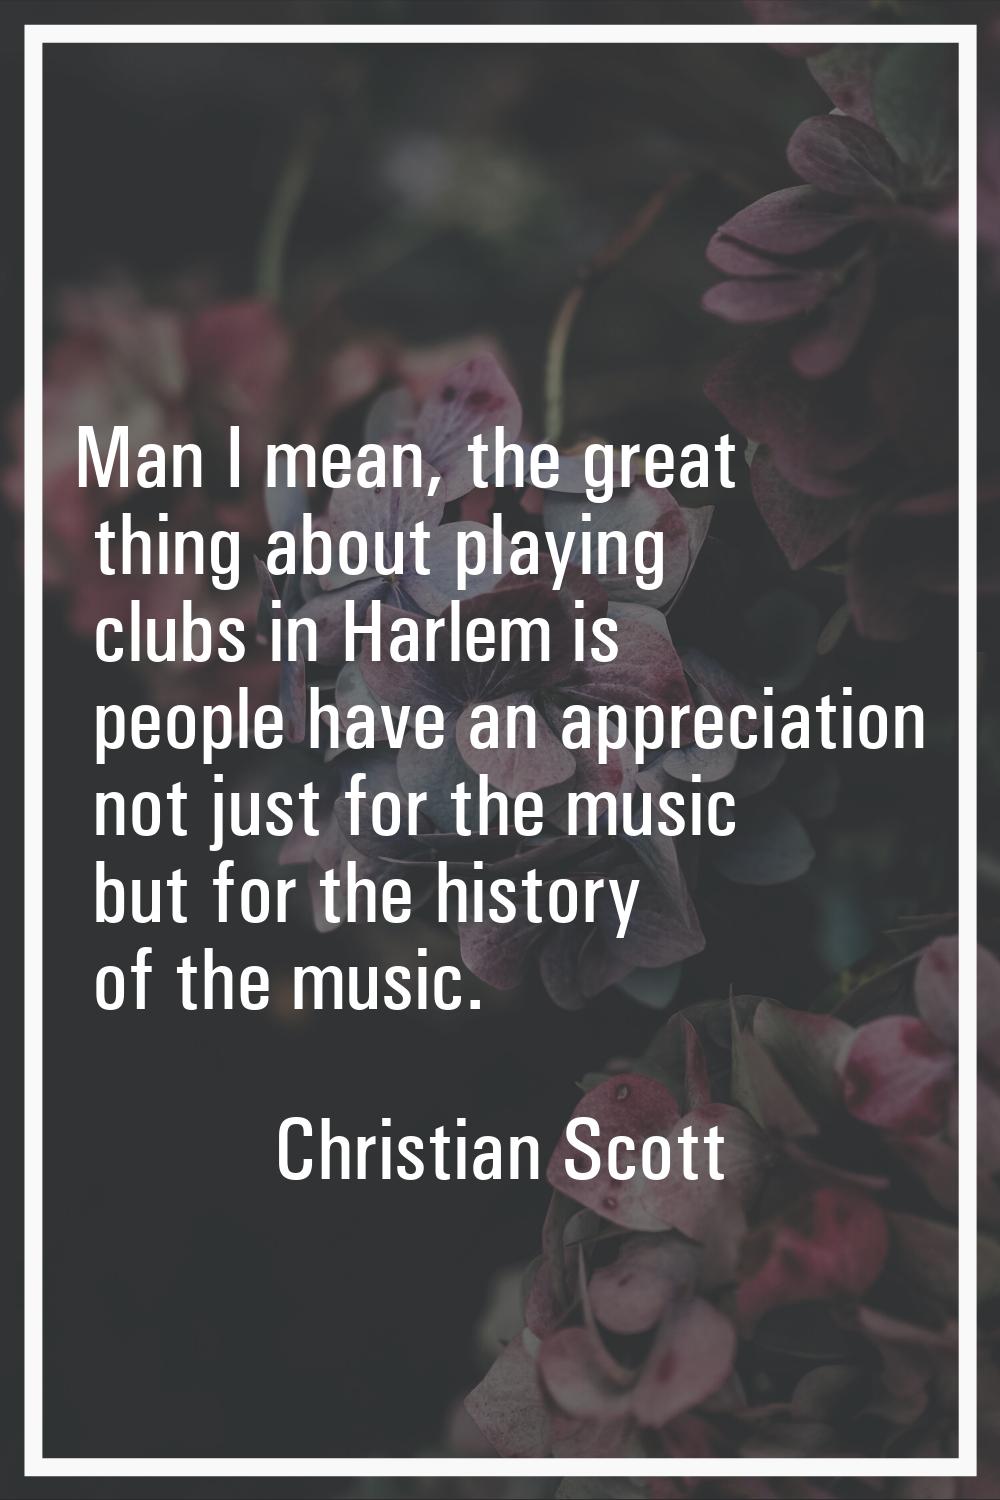 Man I mean, the great thing about playing clubs in Harlem is people have an appreciation not just f